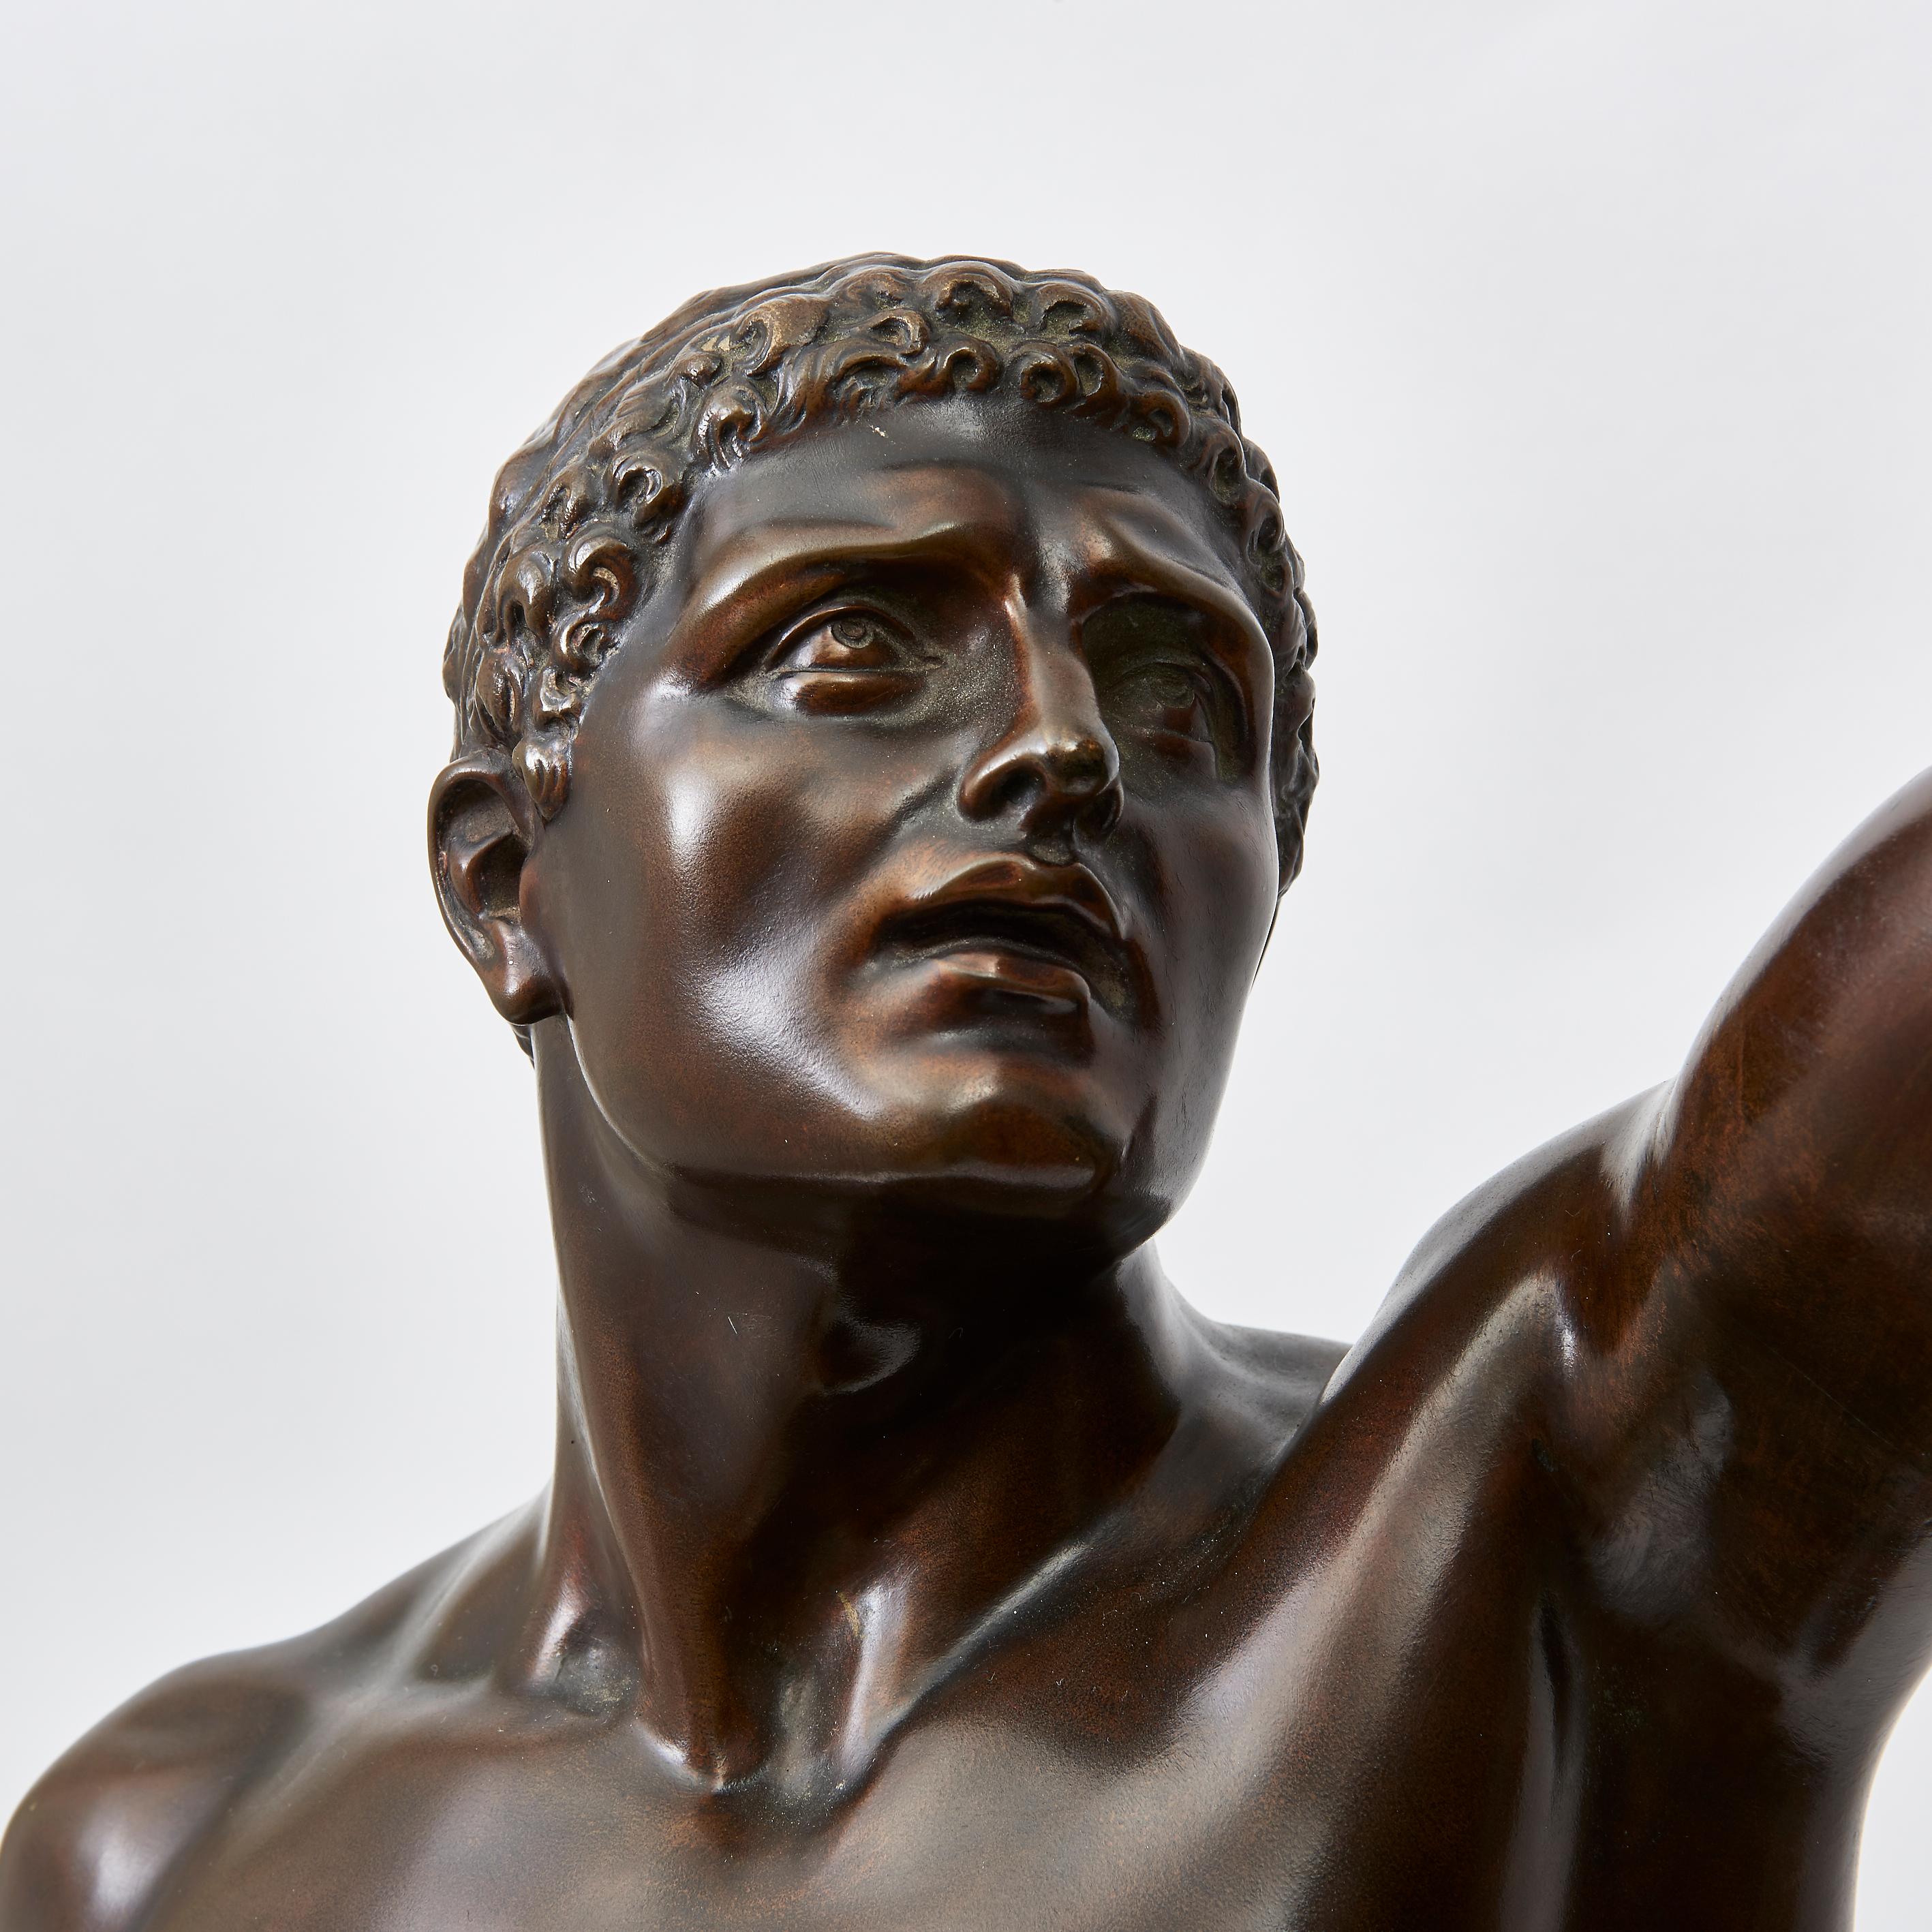 19th Century Bronze Sculpture of a Gladiator by French Sculptor Emile Guillemin, 1841-1907 For Sale